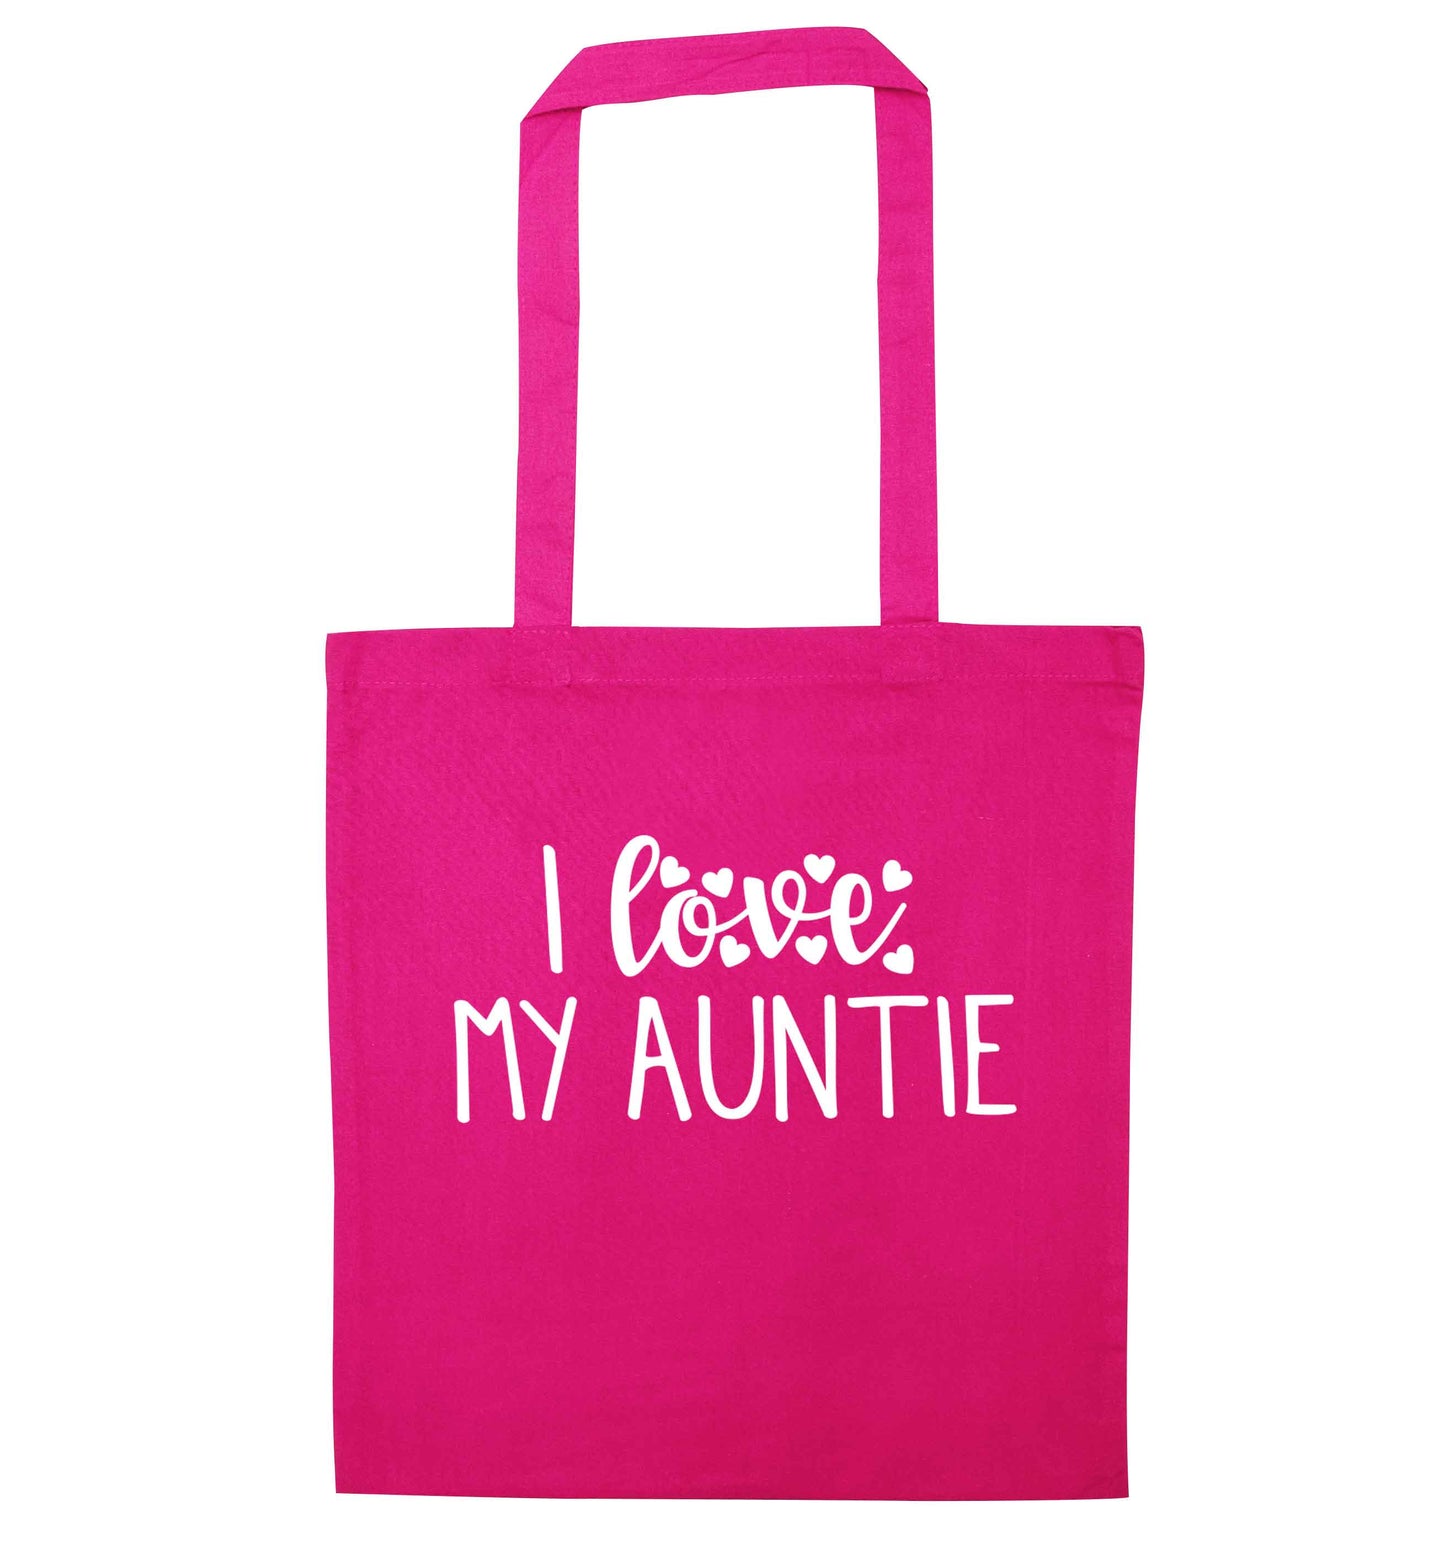 I love my auntie pink tote bag